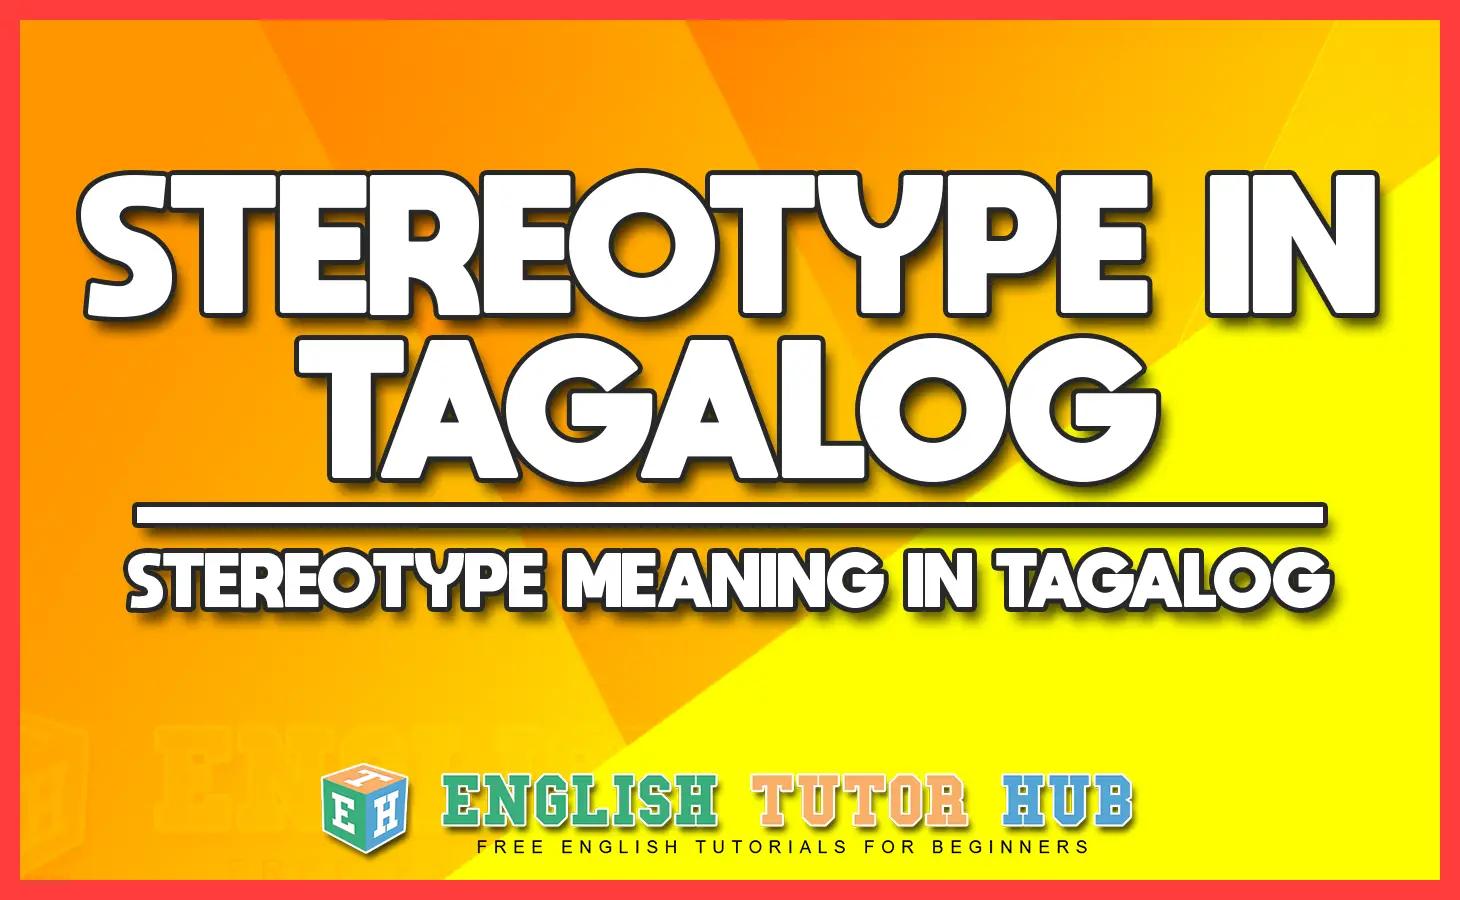 Stereotype in Tagalog - Stereotype Meaning in Tagalog